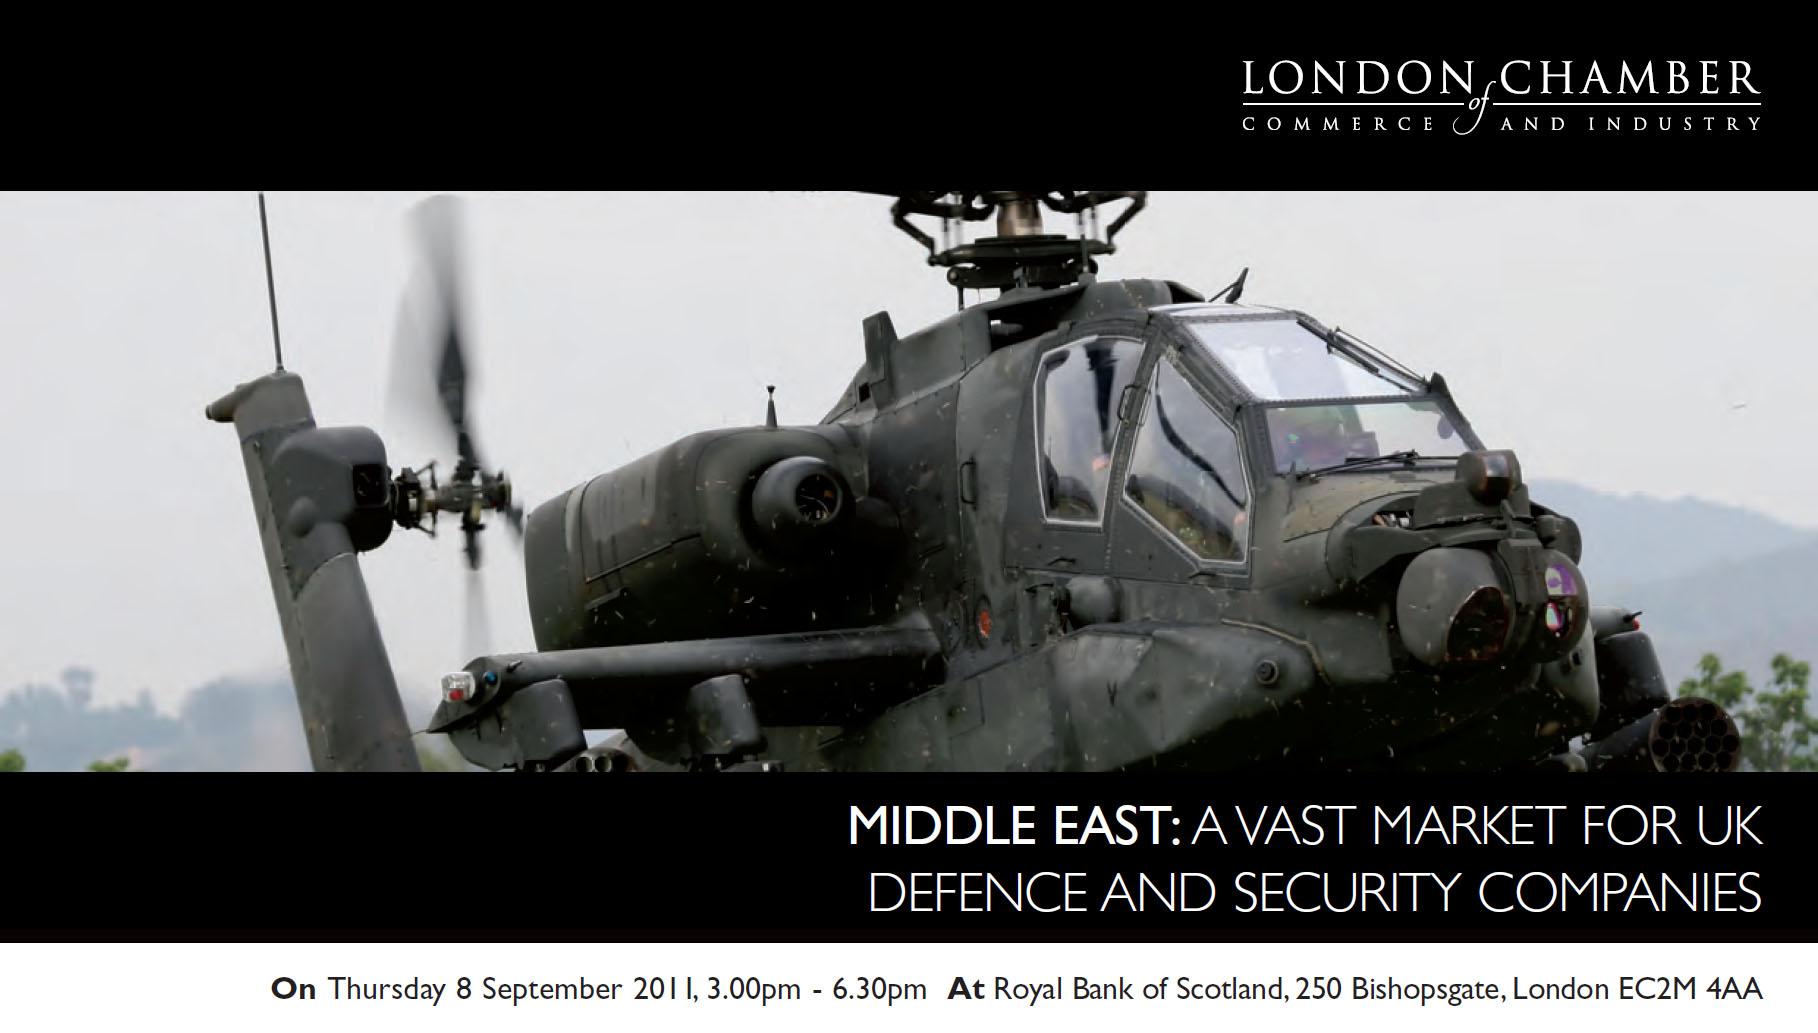 MIDDLE EAST: A VAST MARKET FOR UK DEFENCE AND SECURITY COMPANIES